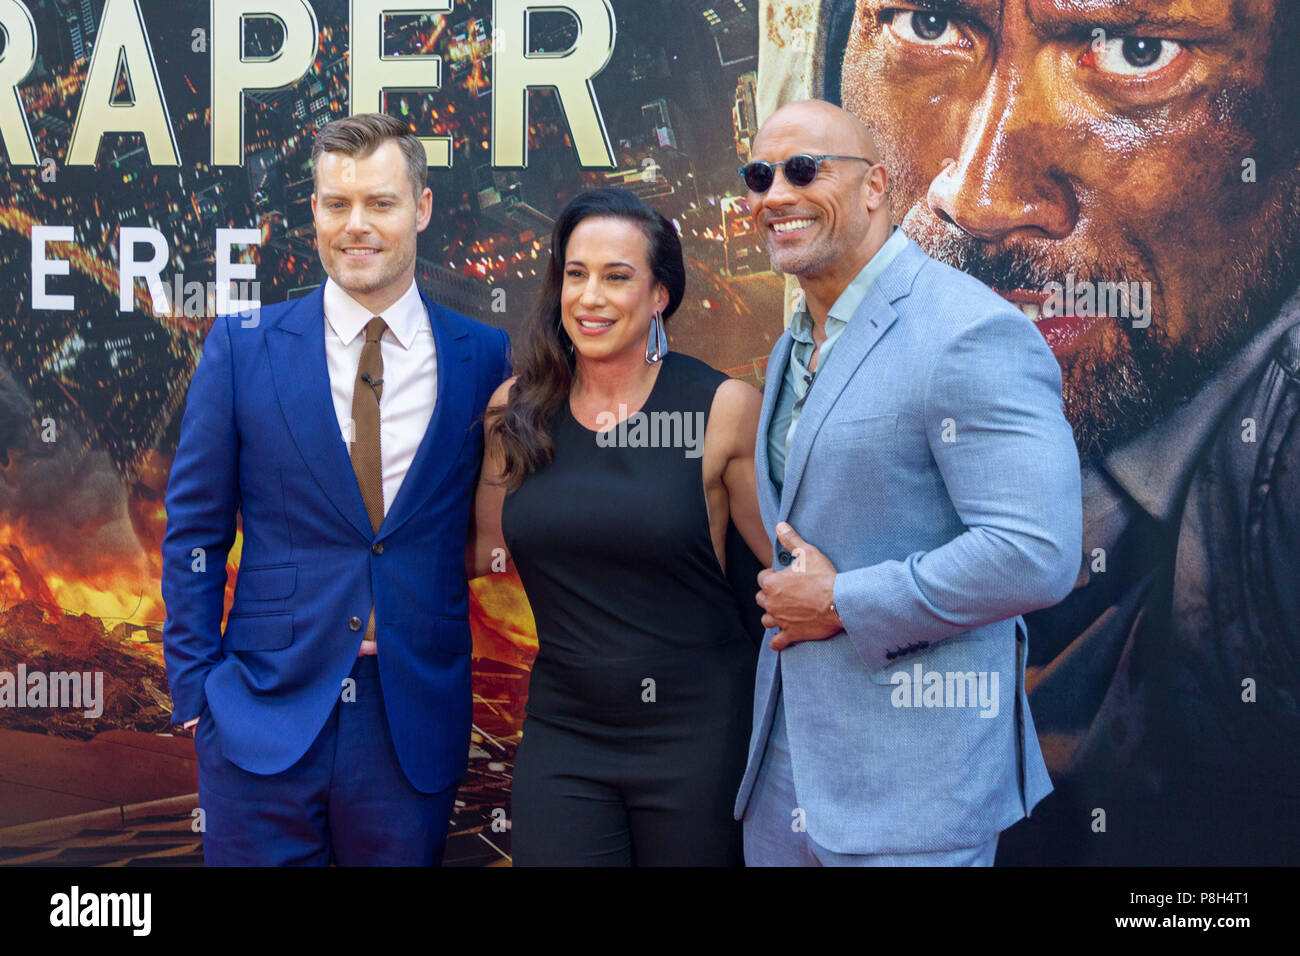 New York, USA. 10th July, 2018. Director Rawson Marshall Thurber, executive producer Dany Garcia, and actor Dwayne Johnson attend the New York premiere of “Skyscraper” on July 10, 2018. Credit: Jeremy Burke/Alamy Live News Stock Photo